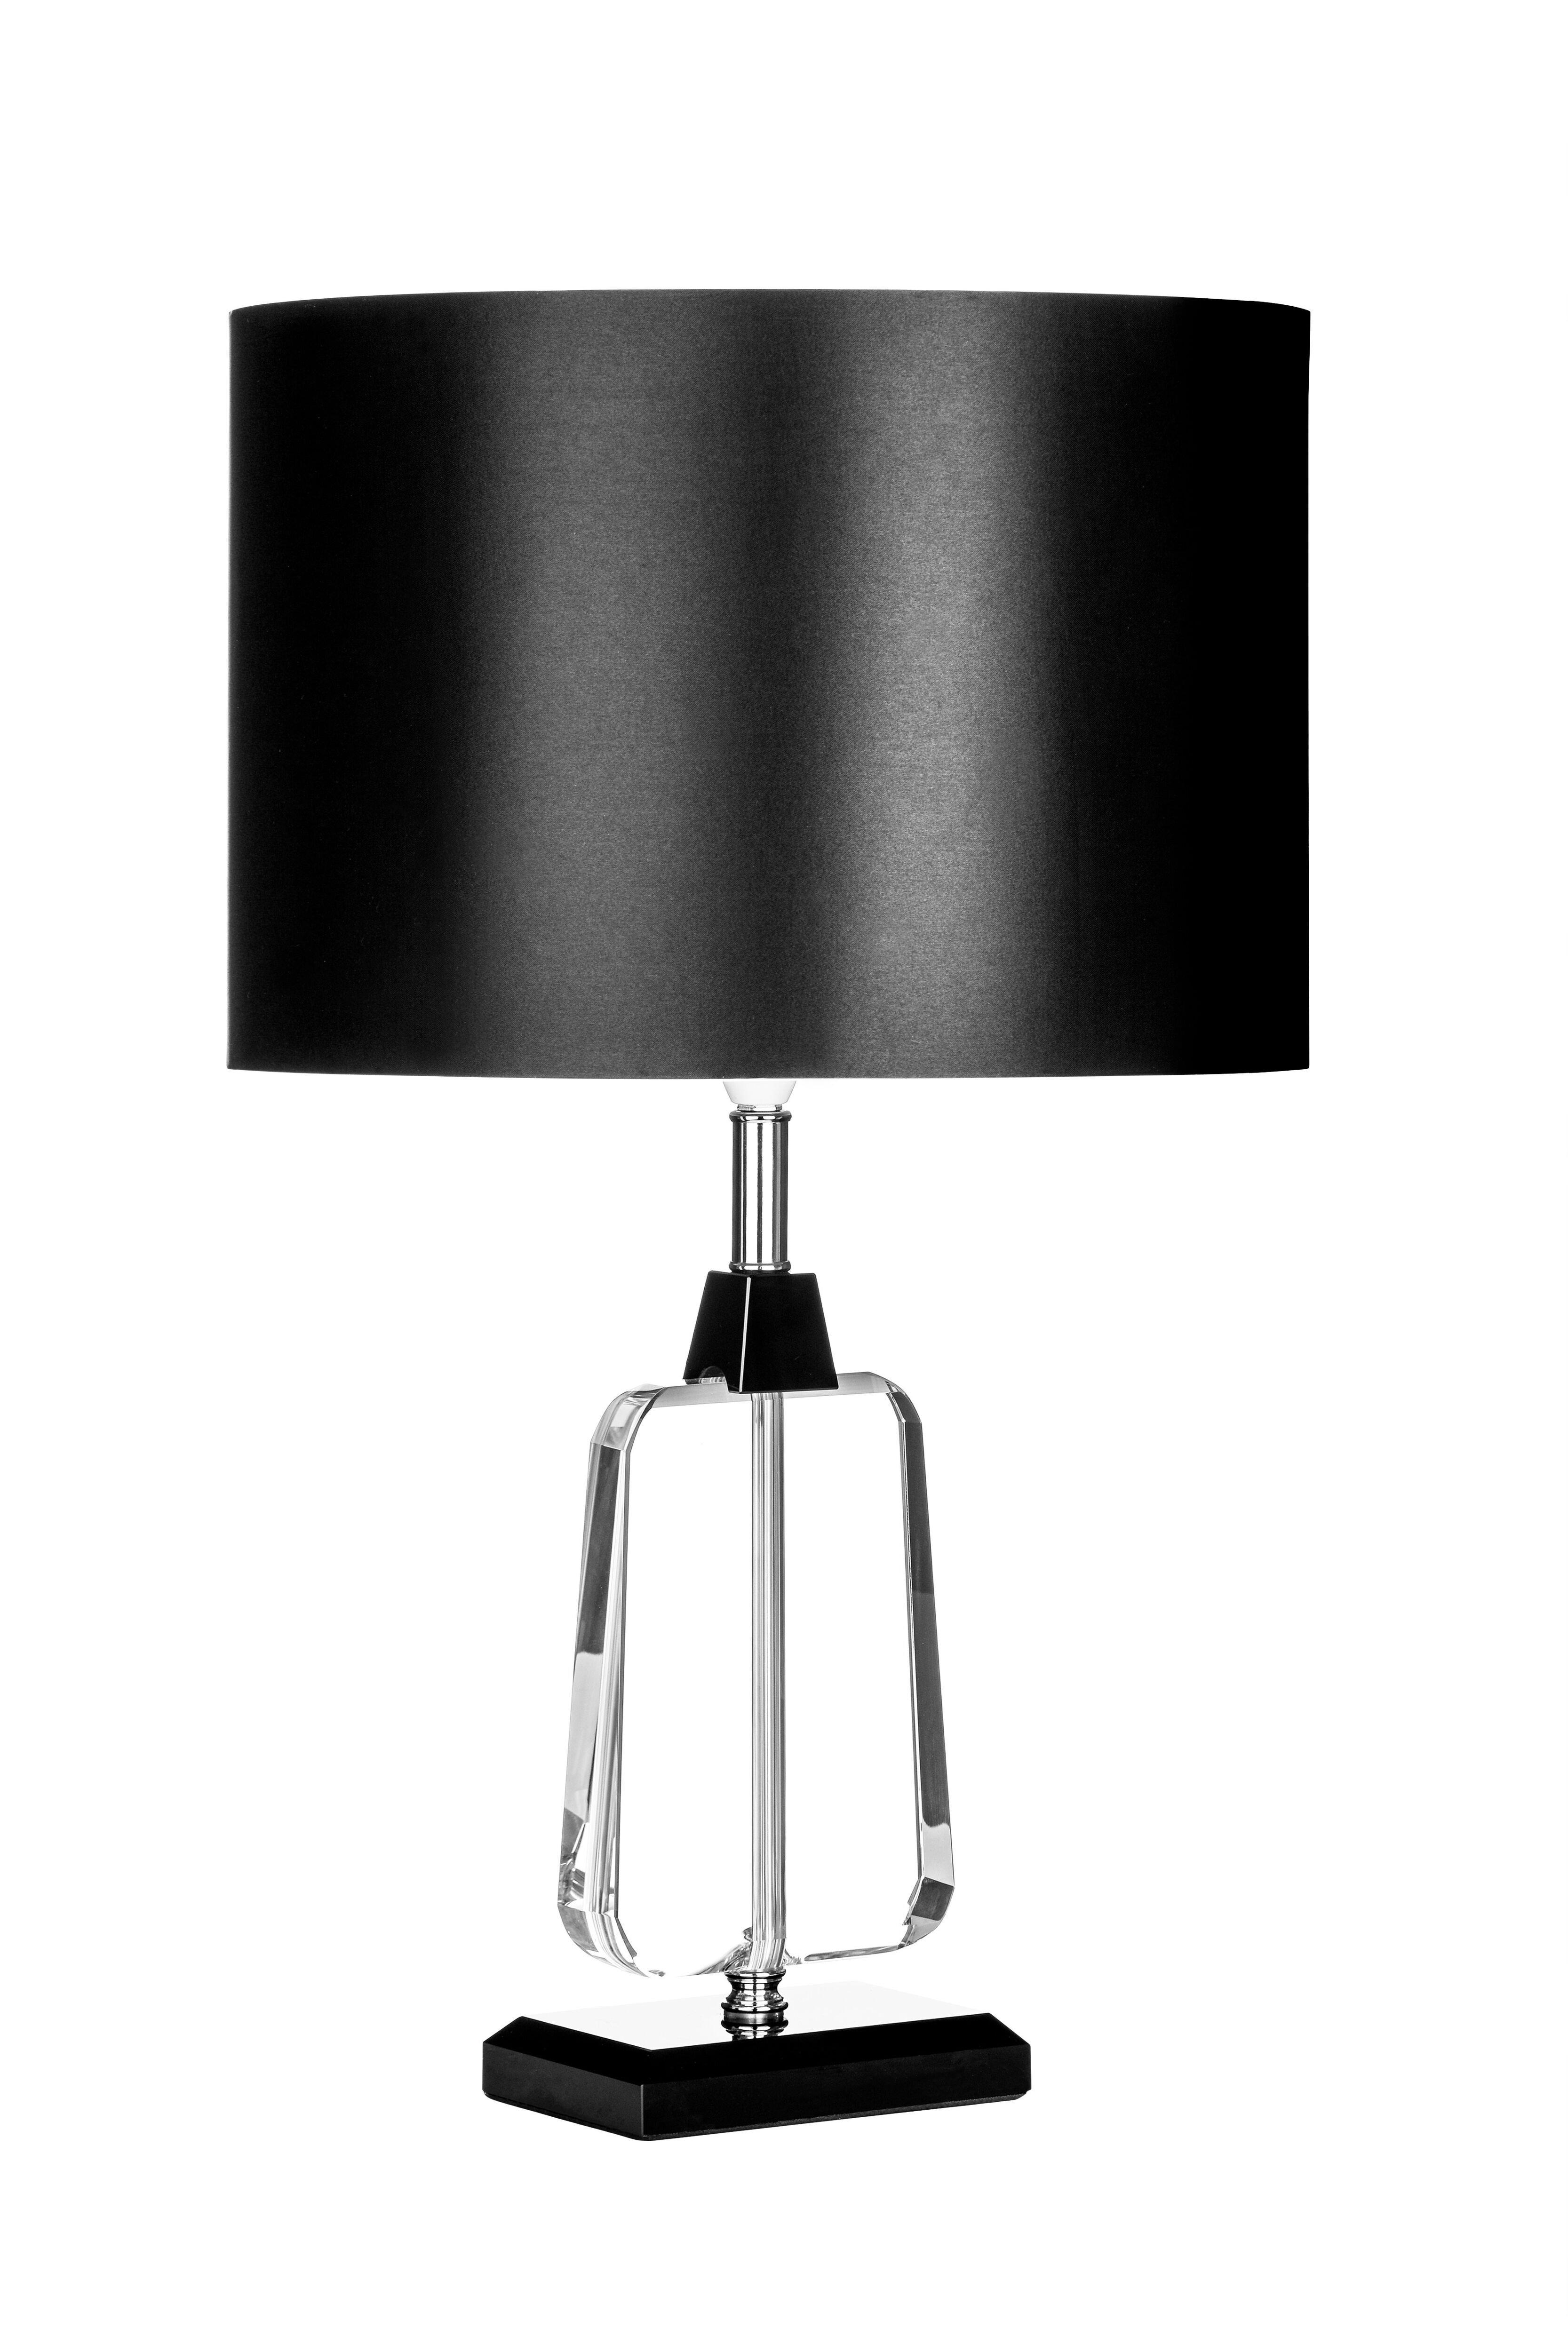 Interiors by Premier Tabatha Table Lamp